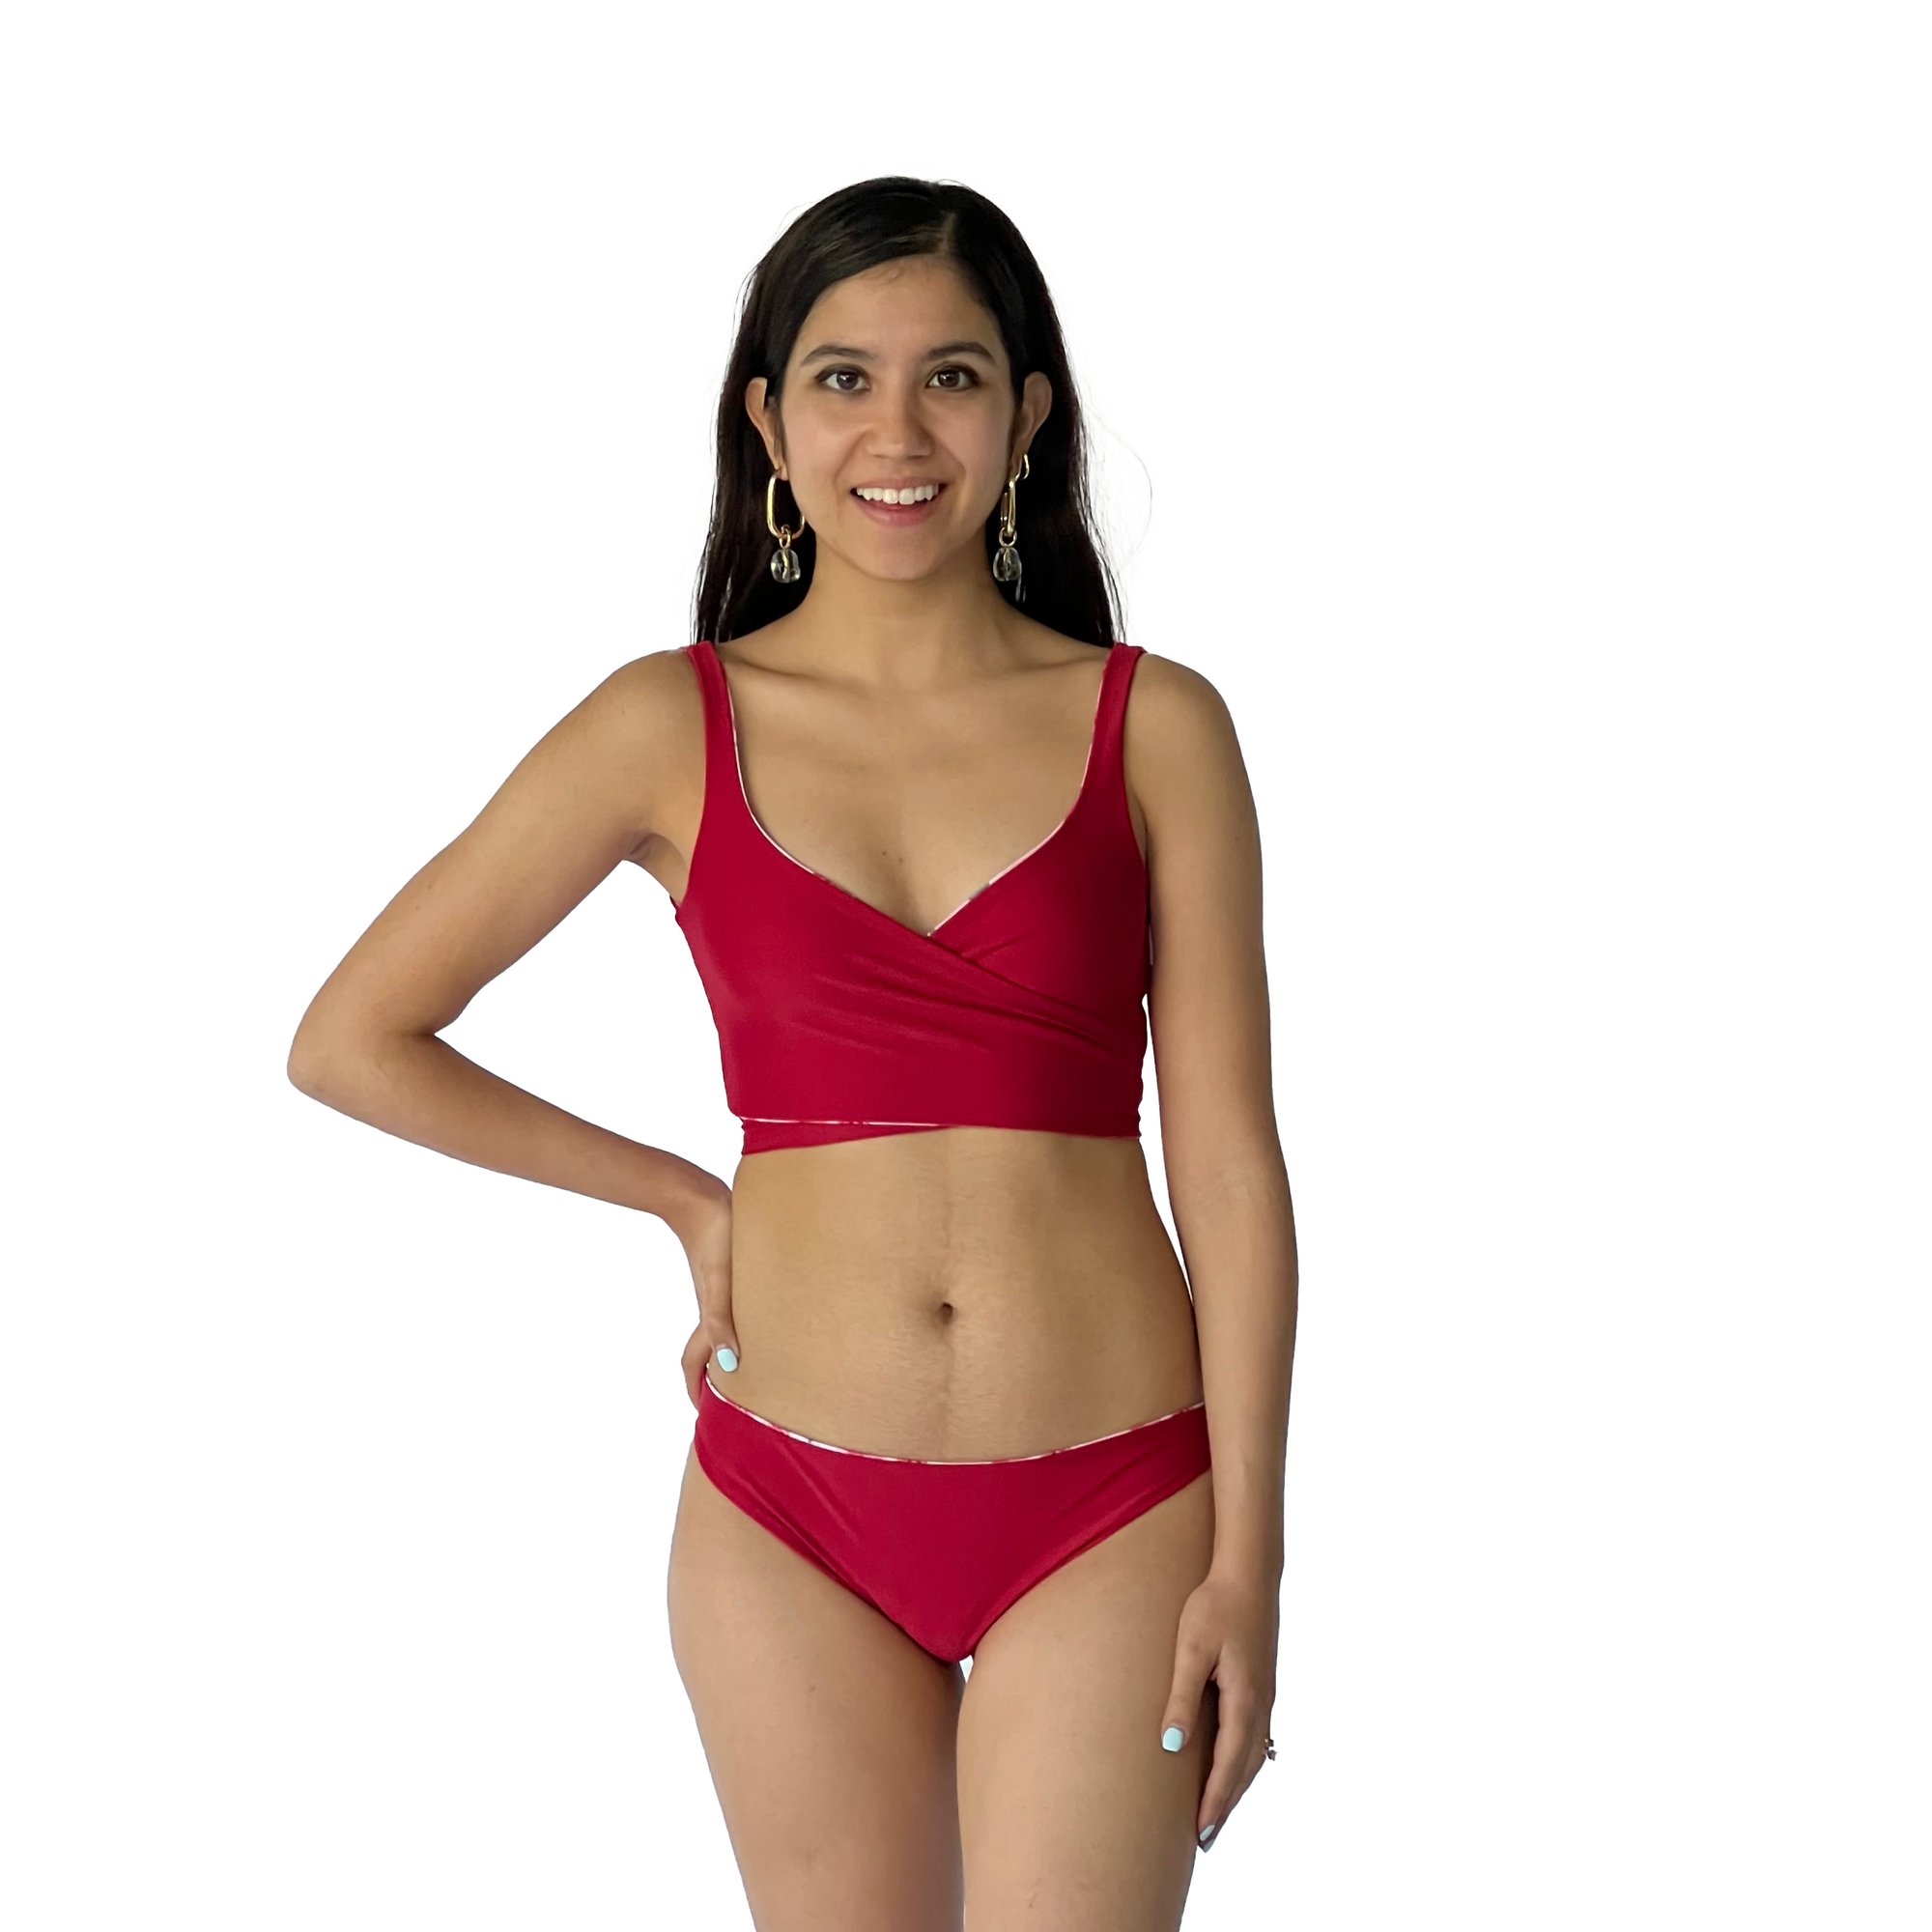 Magic Top Reversible - Strawberry Pie + Red